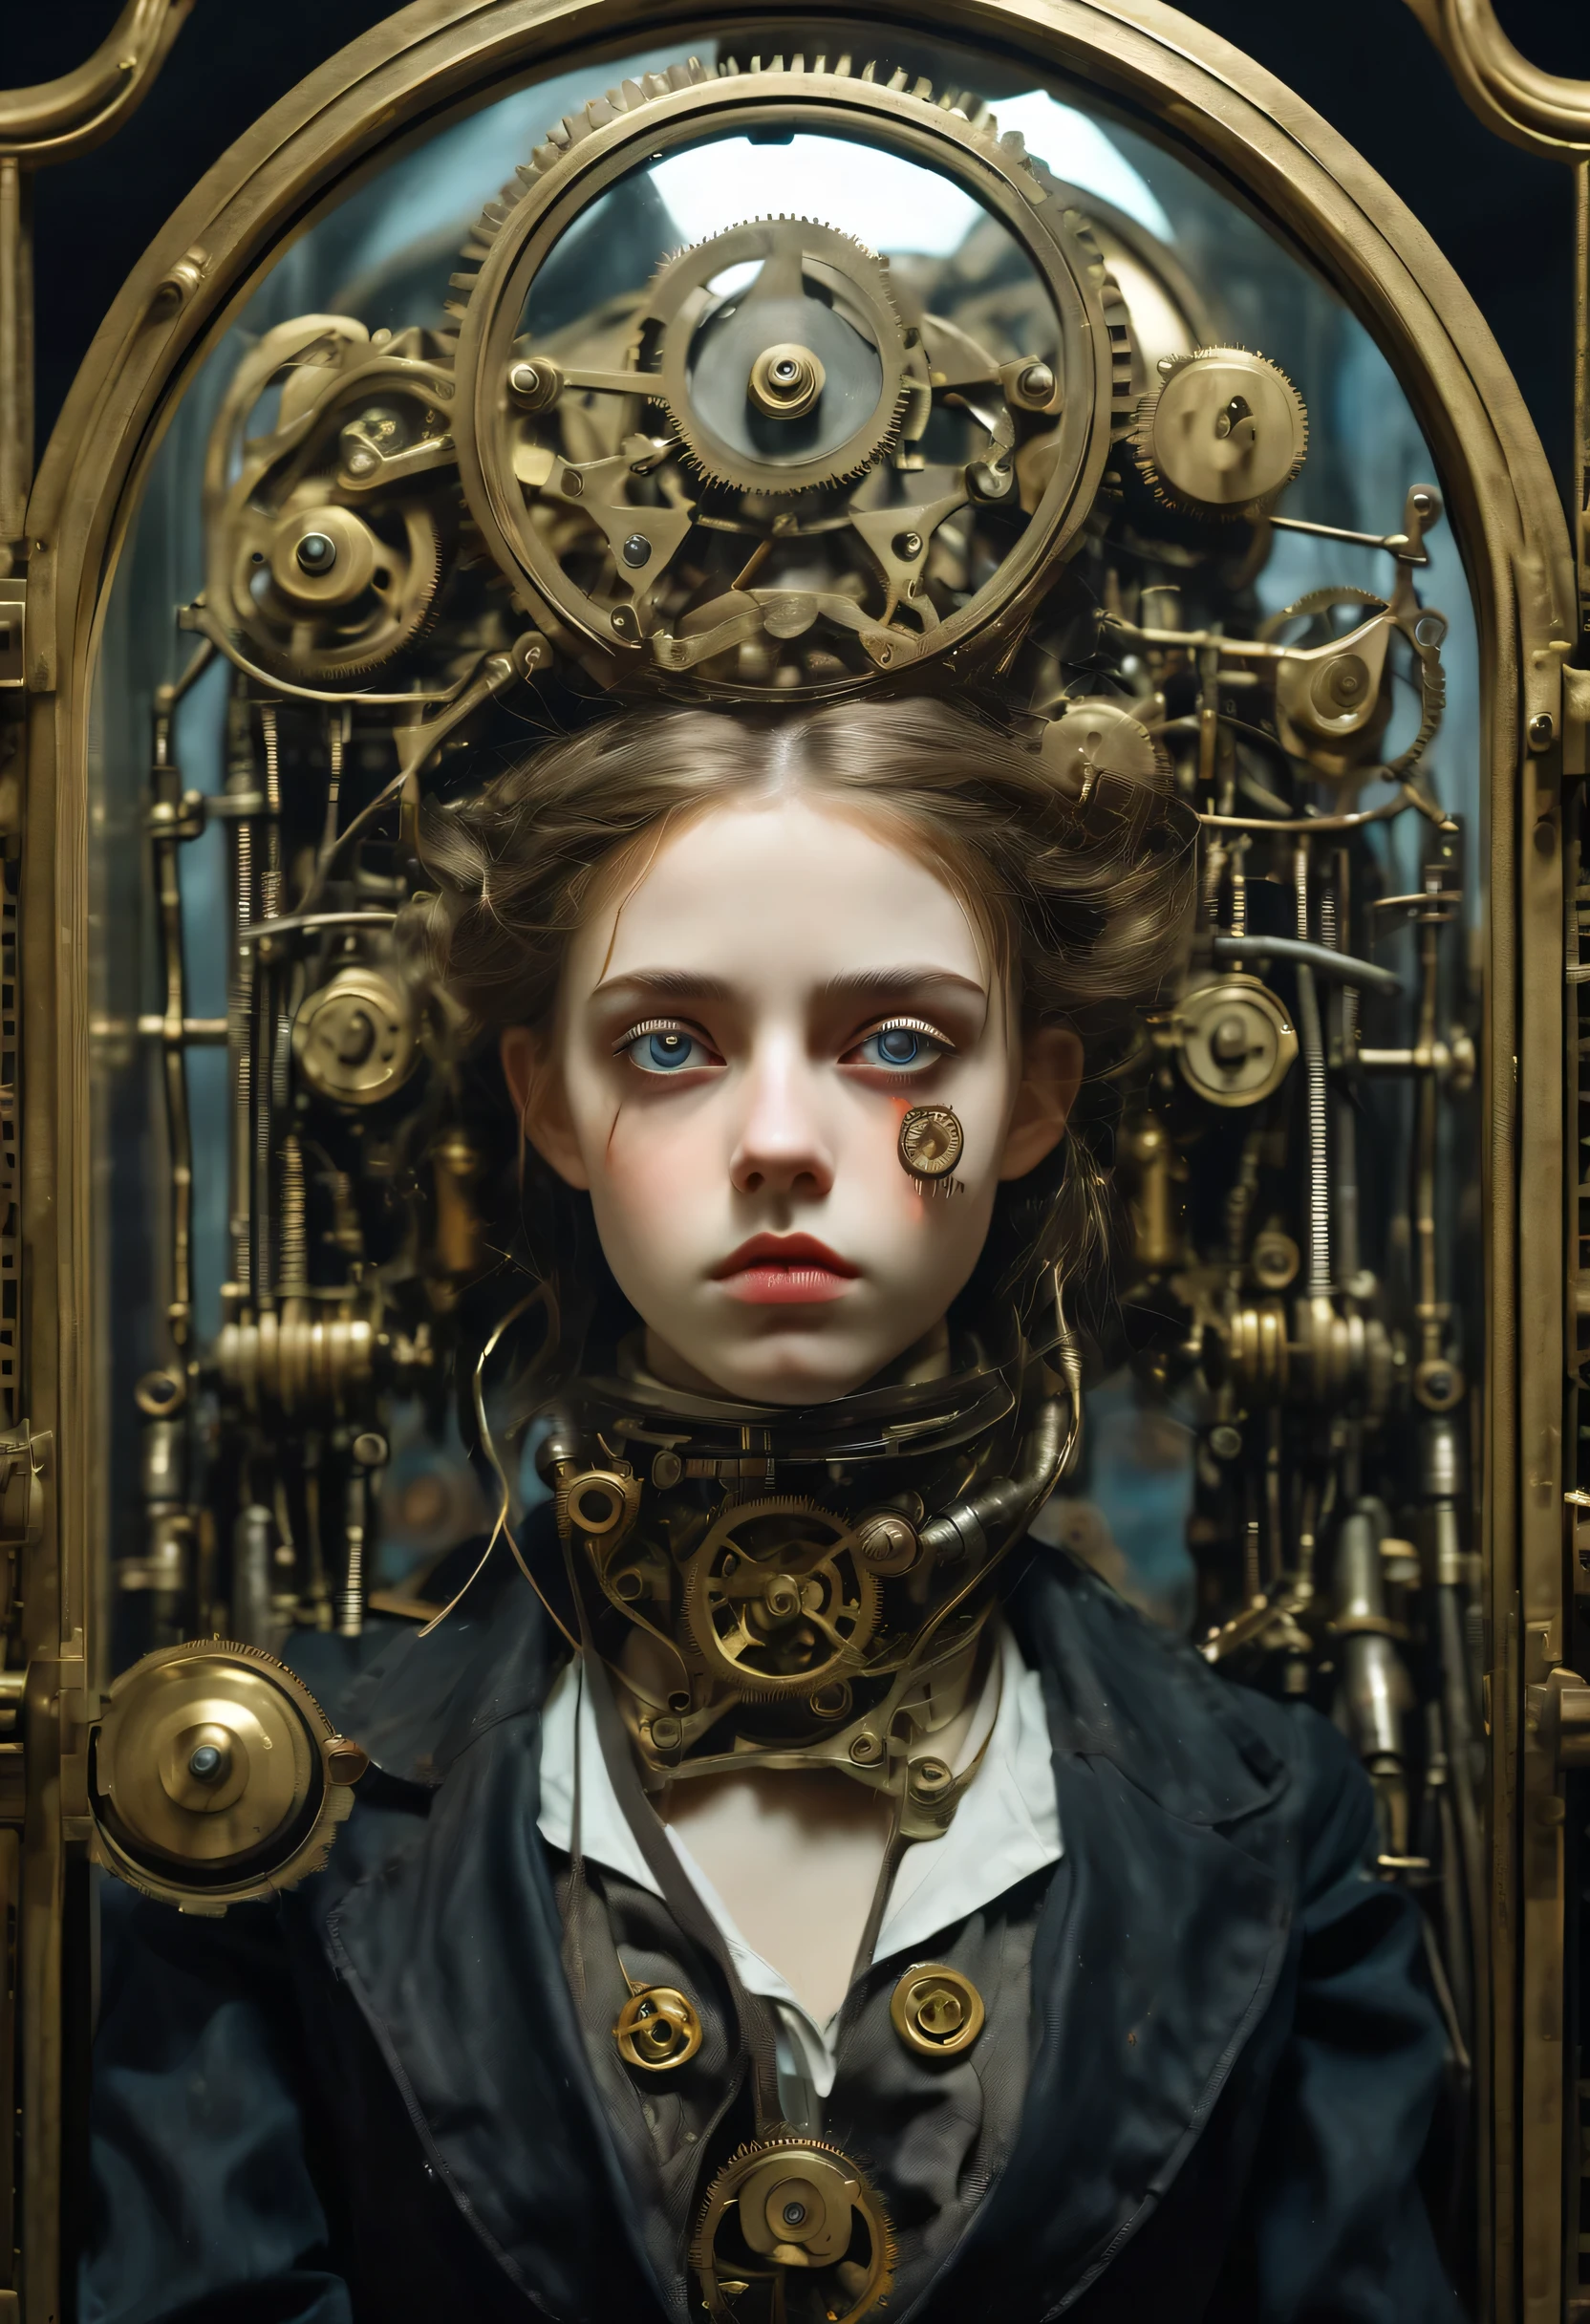 Clockpunk dark fantasy brush strokes, like a sad european young girl, Karakuri doll, A perfect porcelain machine stares solemnly, reflected in the mirror, Photorealistic rendering of impressive images, Skillfully drawn to evoke strong emotions, eyes express feelings of shame and regret, Incredibly clear and detailed, Instantly grab your audience&#39;s attention, Image quality is exceptional, Every feature is meticulously depicted., Make the scene feel almost concrete.